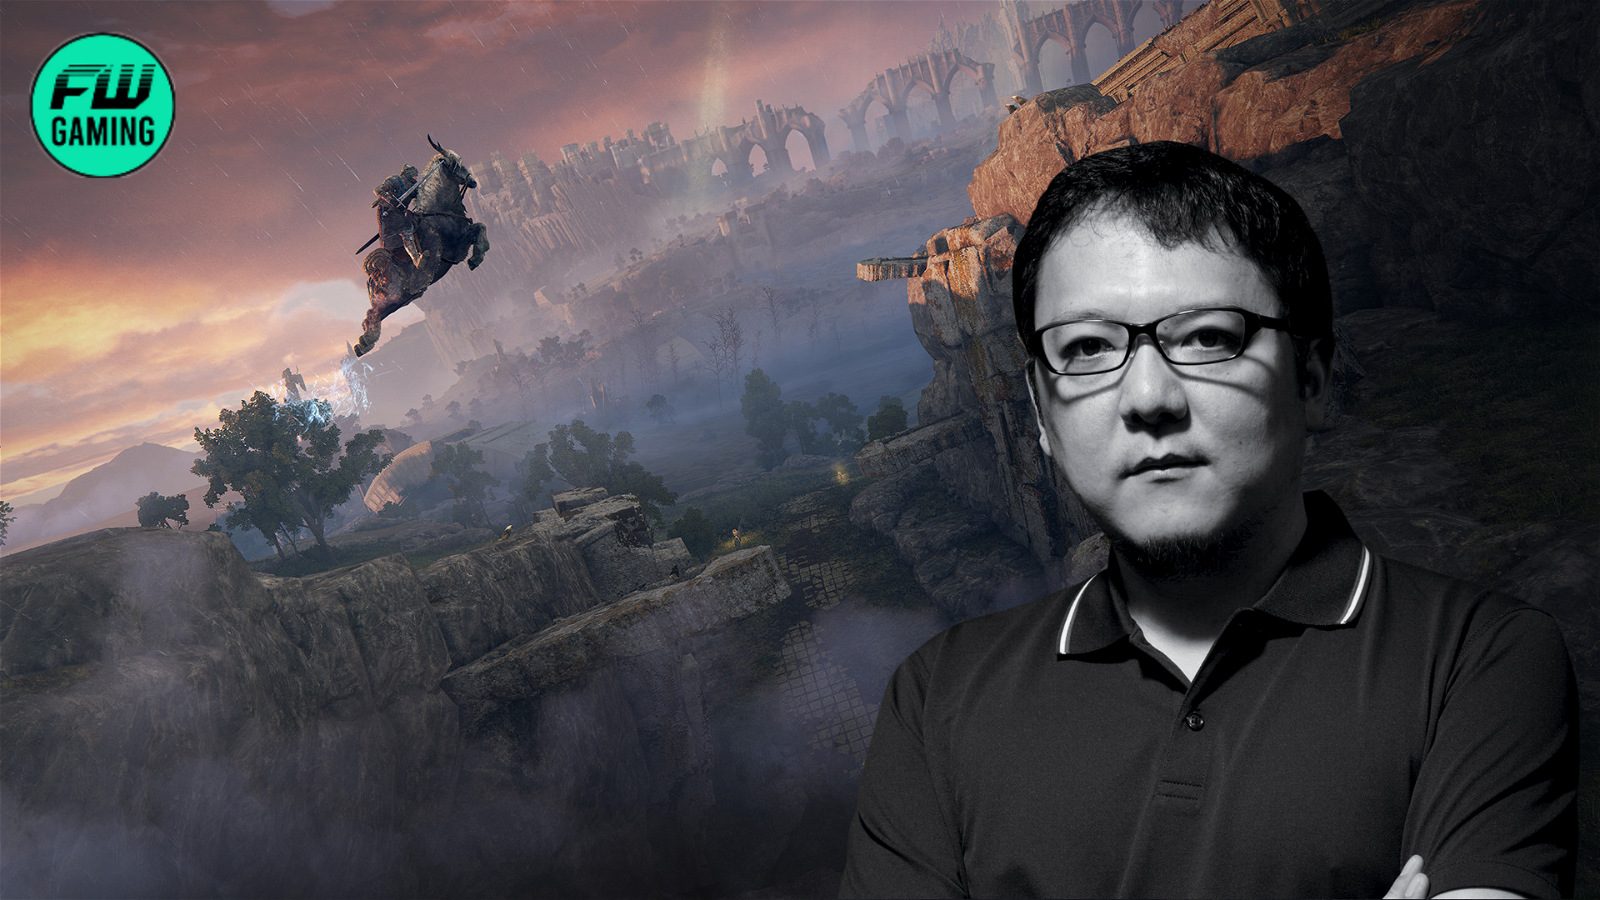 "This is the way I’d want to die": Elden Ring Creator Hidetaka Miyazaki Reveals Death Is Nothing More Than a Story to Share in His Games - It's a Feature, Not a Punishment